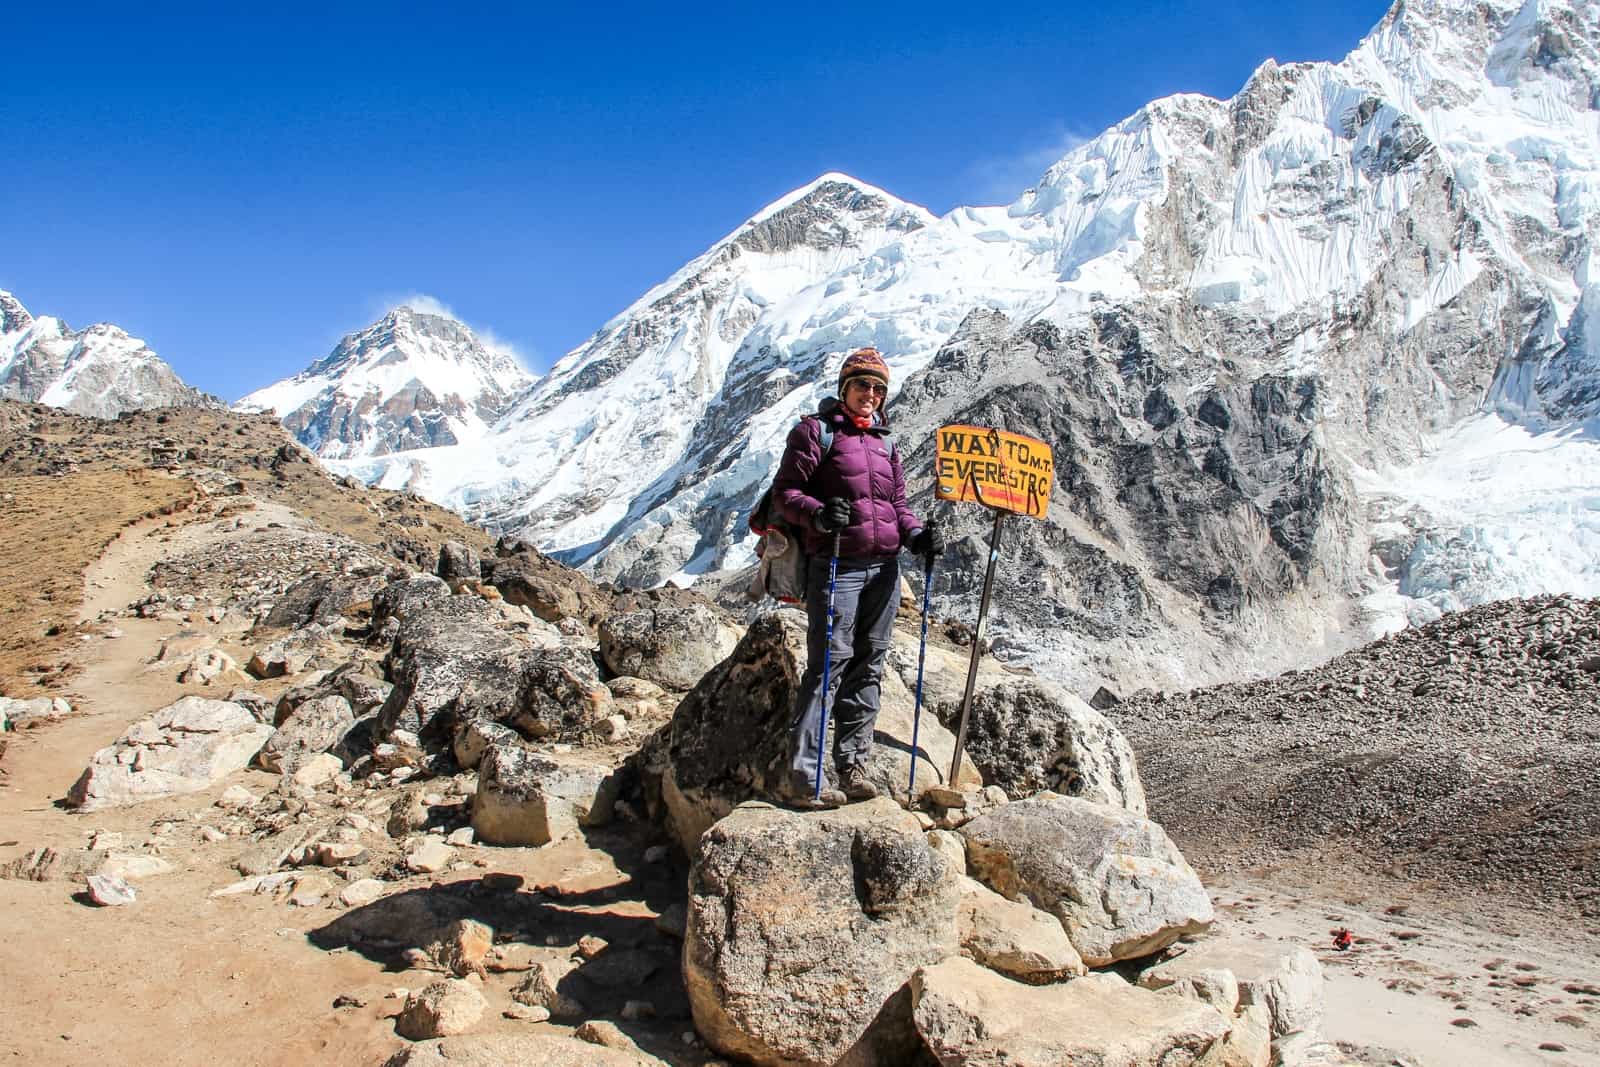 A woman in a purple jacket stands on a rock next to the famed "Way to Everest Base Camp" sign, backed by striking white mountains